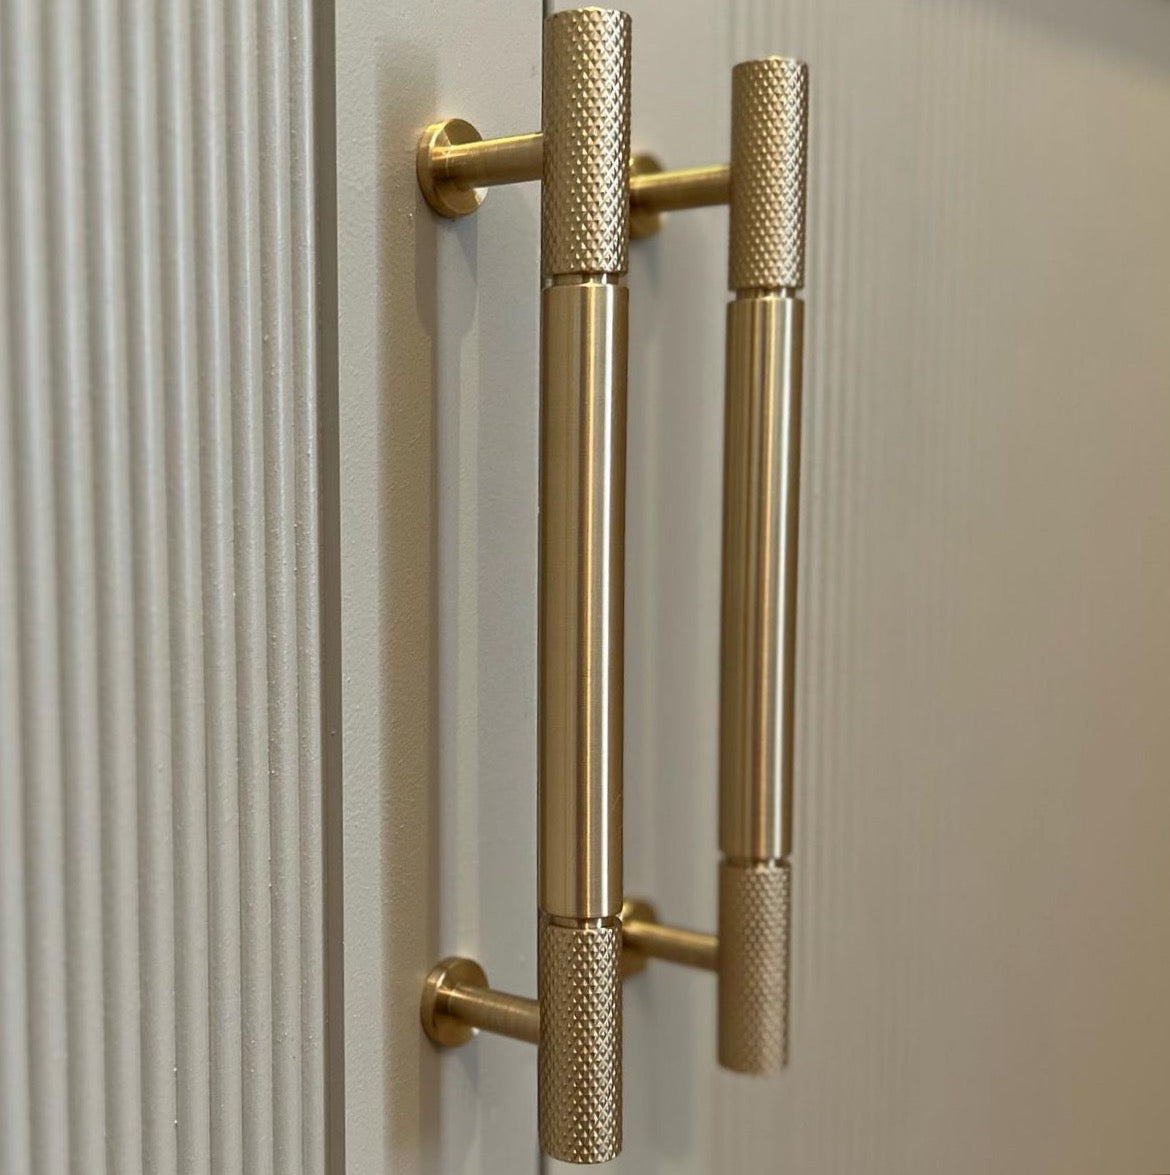 Bambino Grande pull bar with signature knurl ends in satin brass on dark cream shaker cabinetry - photo by Inner City Carpentry Ireland